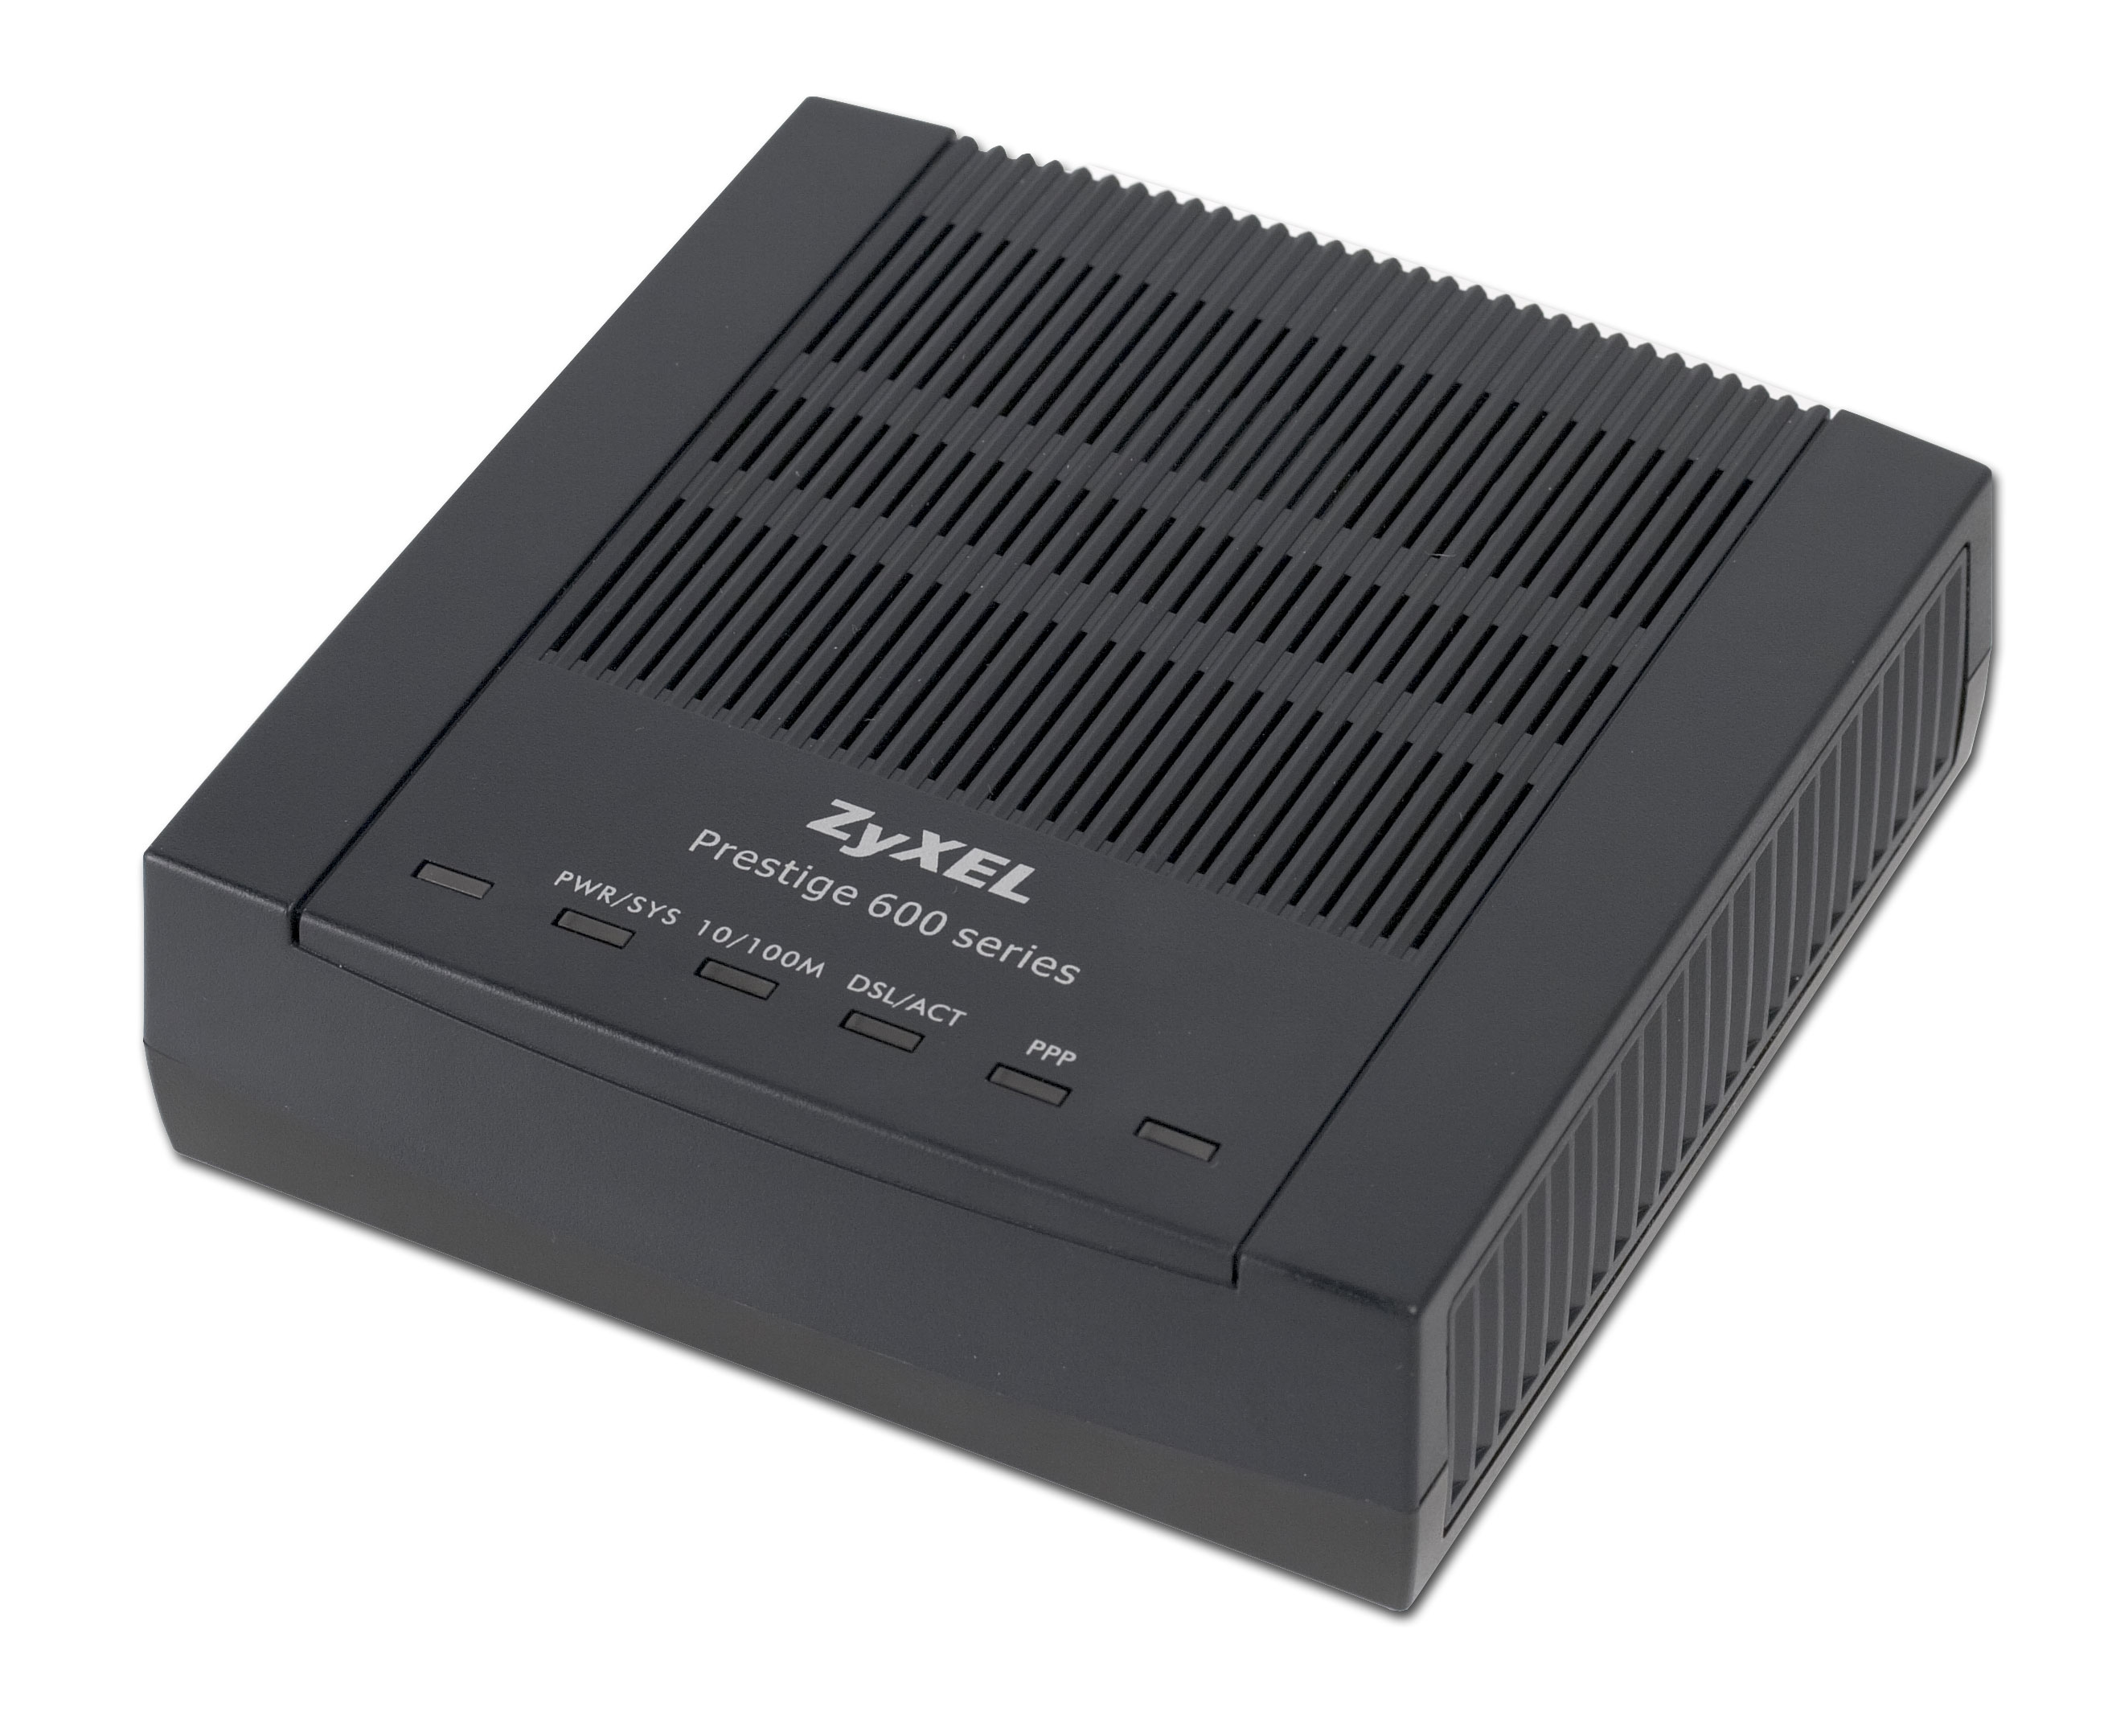 ZyXEL Prestige 660R-F1 ADSL2+ Compact Modem/Router - Box of 10